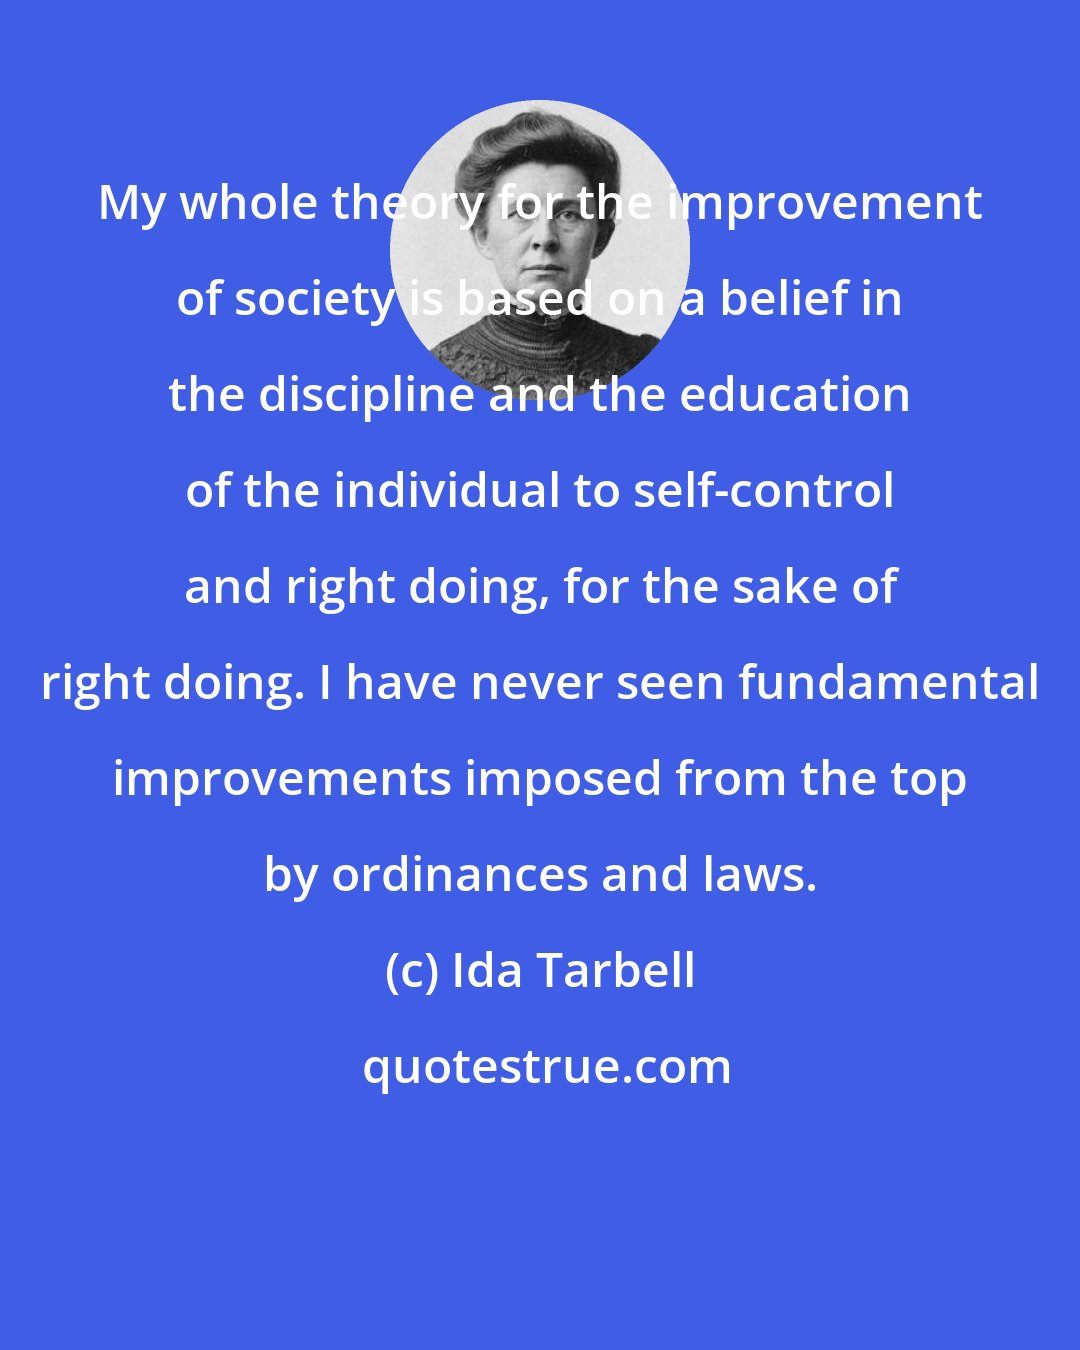 Ida Tarbell: My whole theory for the improvement of society is based on a belief in the discipline and the education of the individual to self-control and right doing, for the sake of right doing. I have never seen fundamental improvements imposed from the top by ordinances and laws.